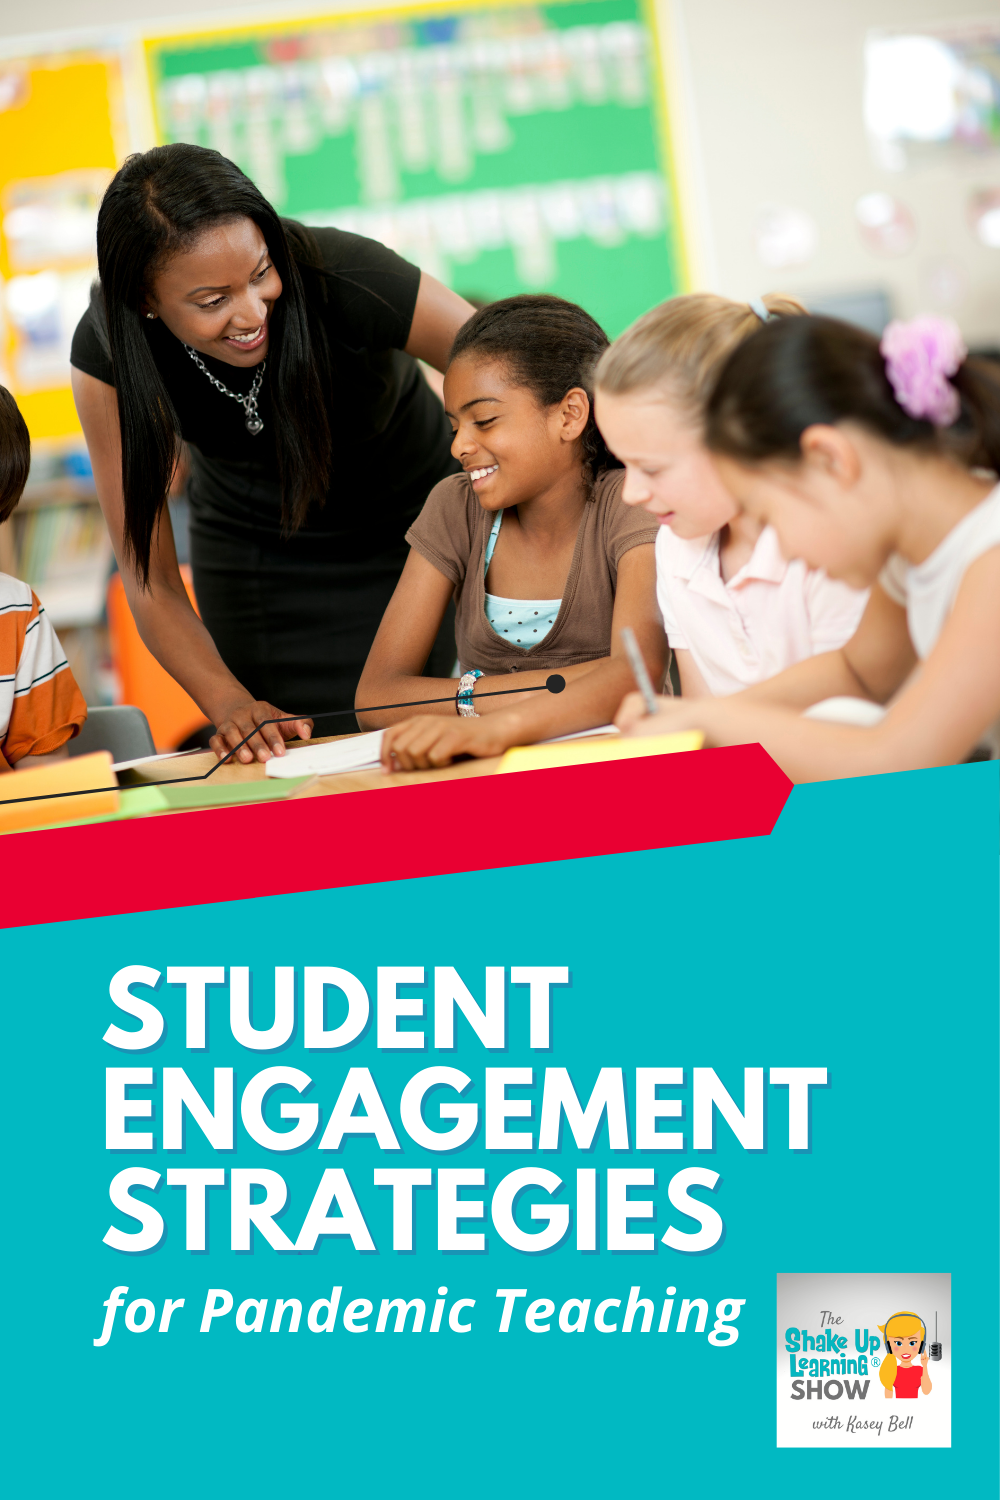 Student Engagement Strategies for Pandemic Teaching (Closing Keynote by Jen Giffen) – SULS0130